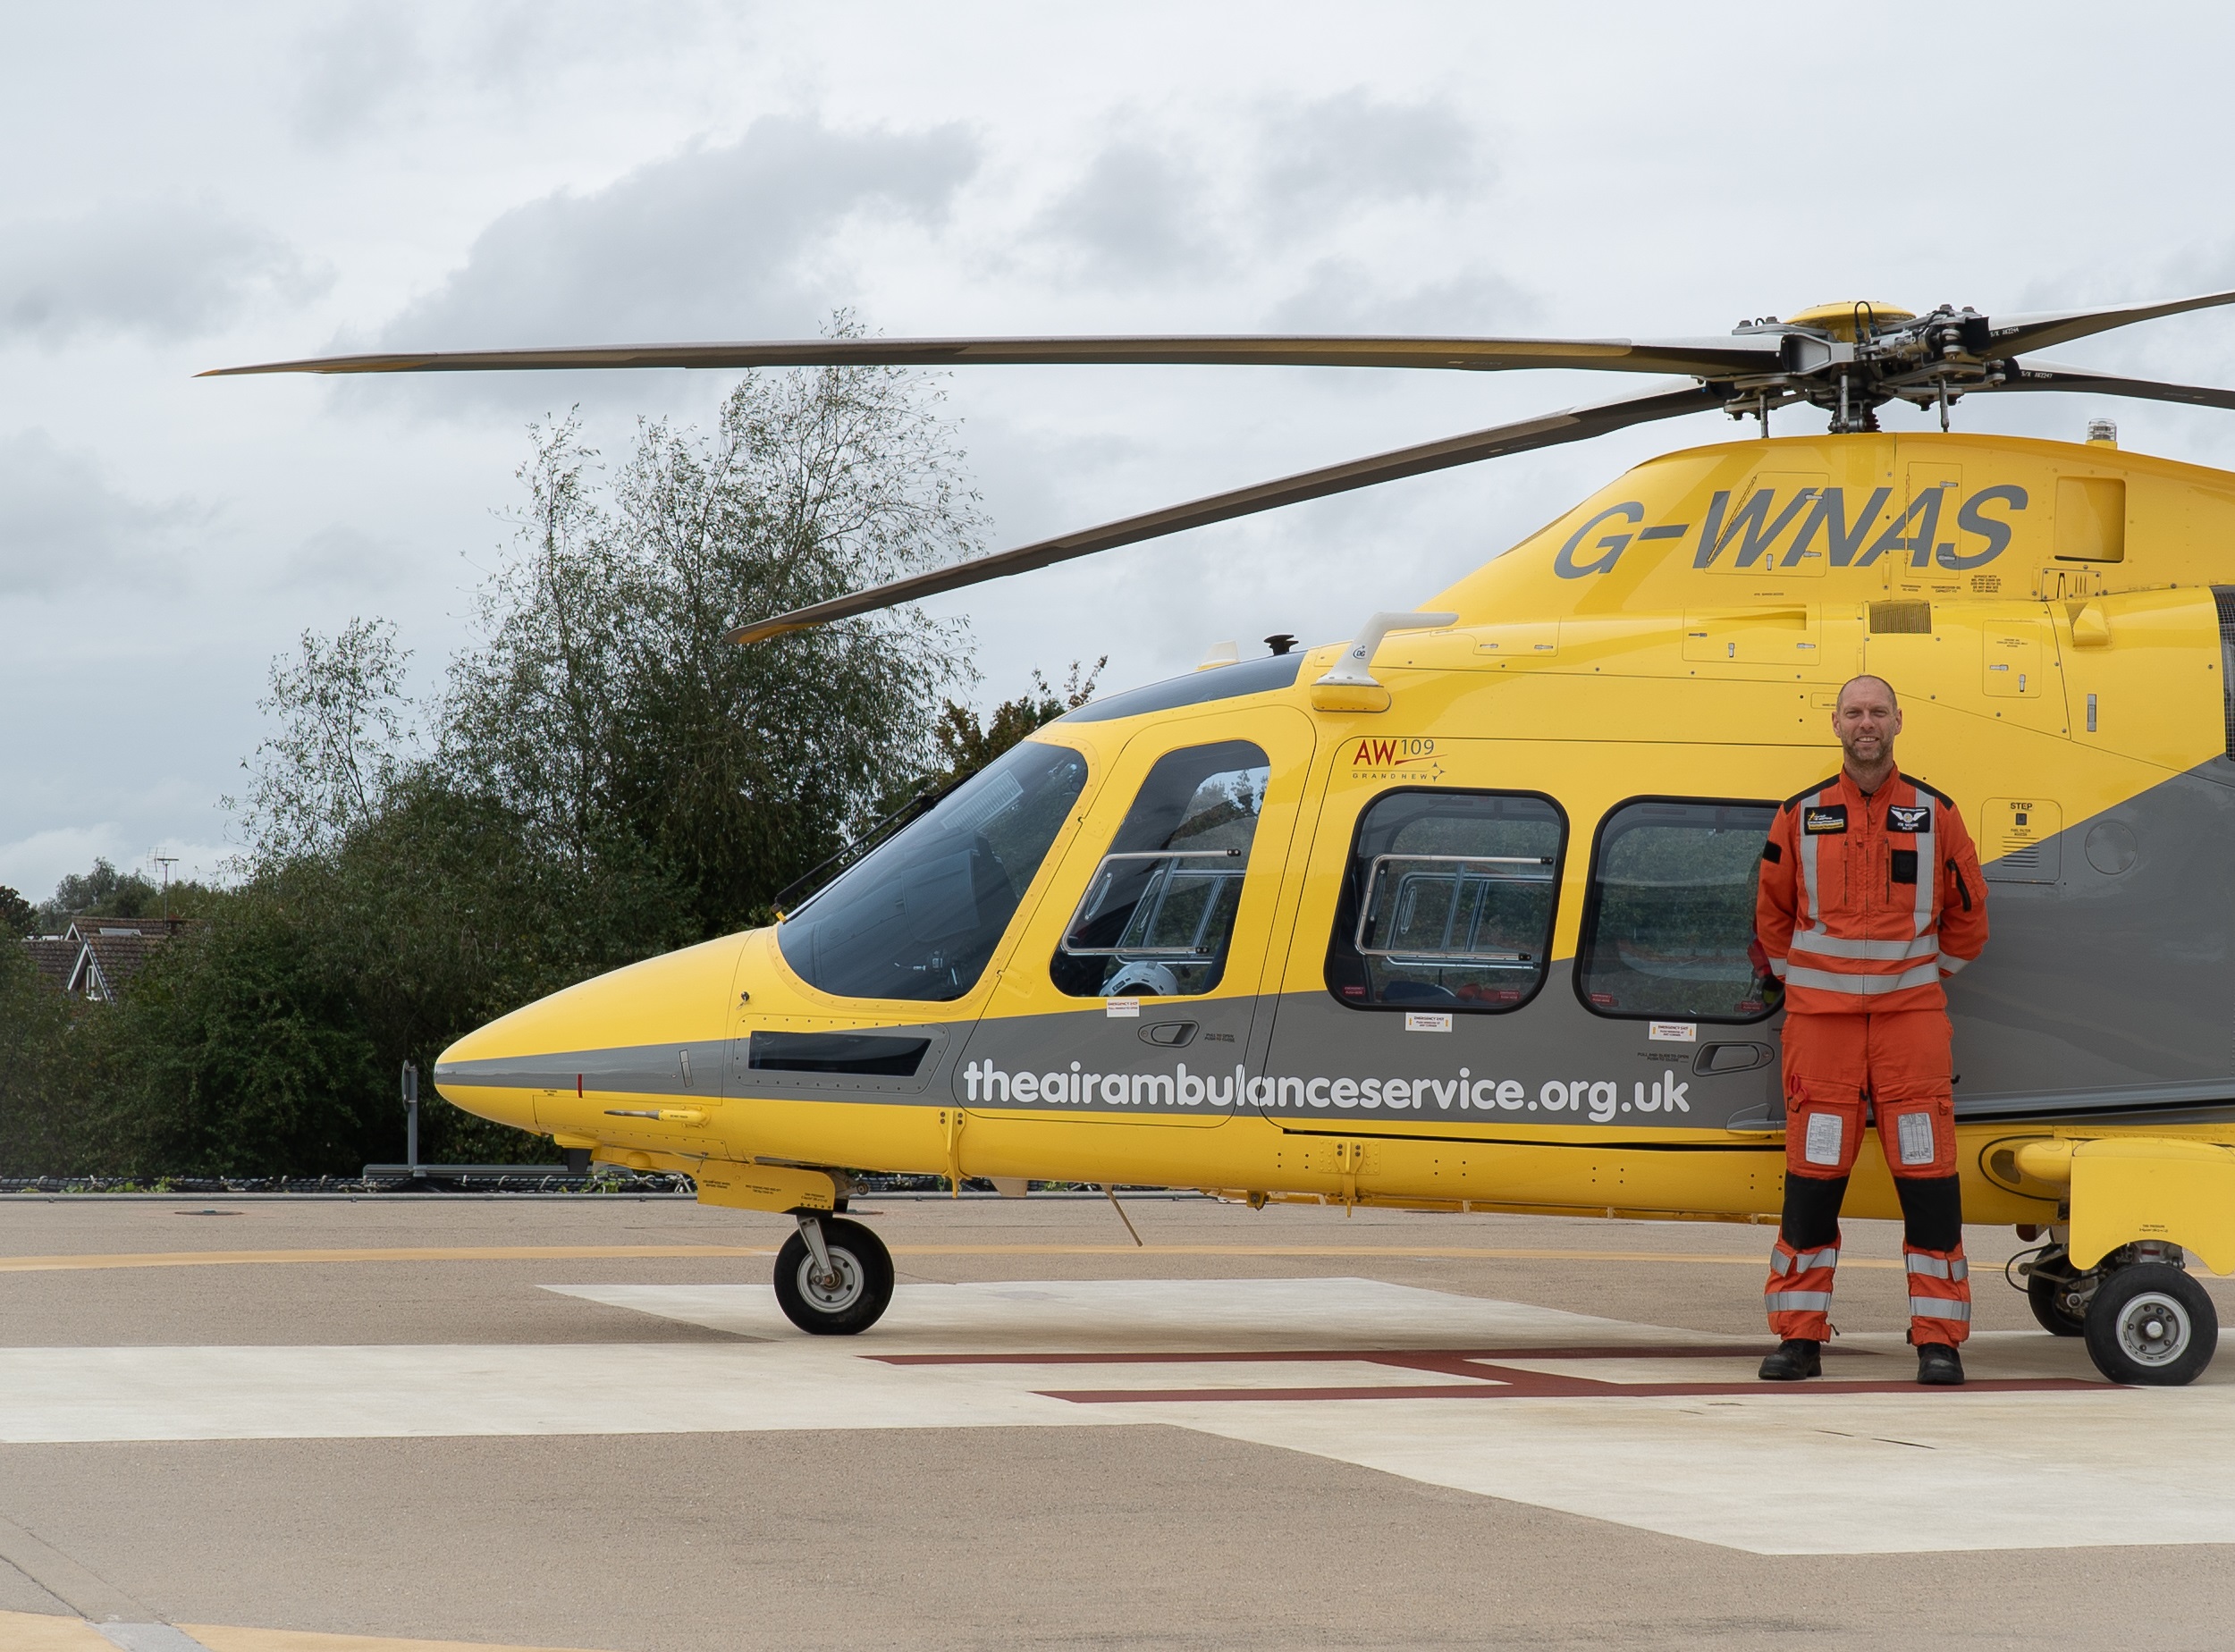 A photograph of an air ambulance paramedic in front of a yellow helicopter